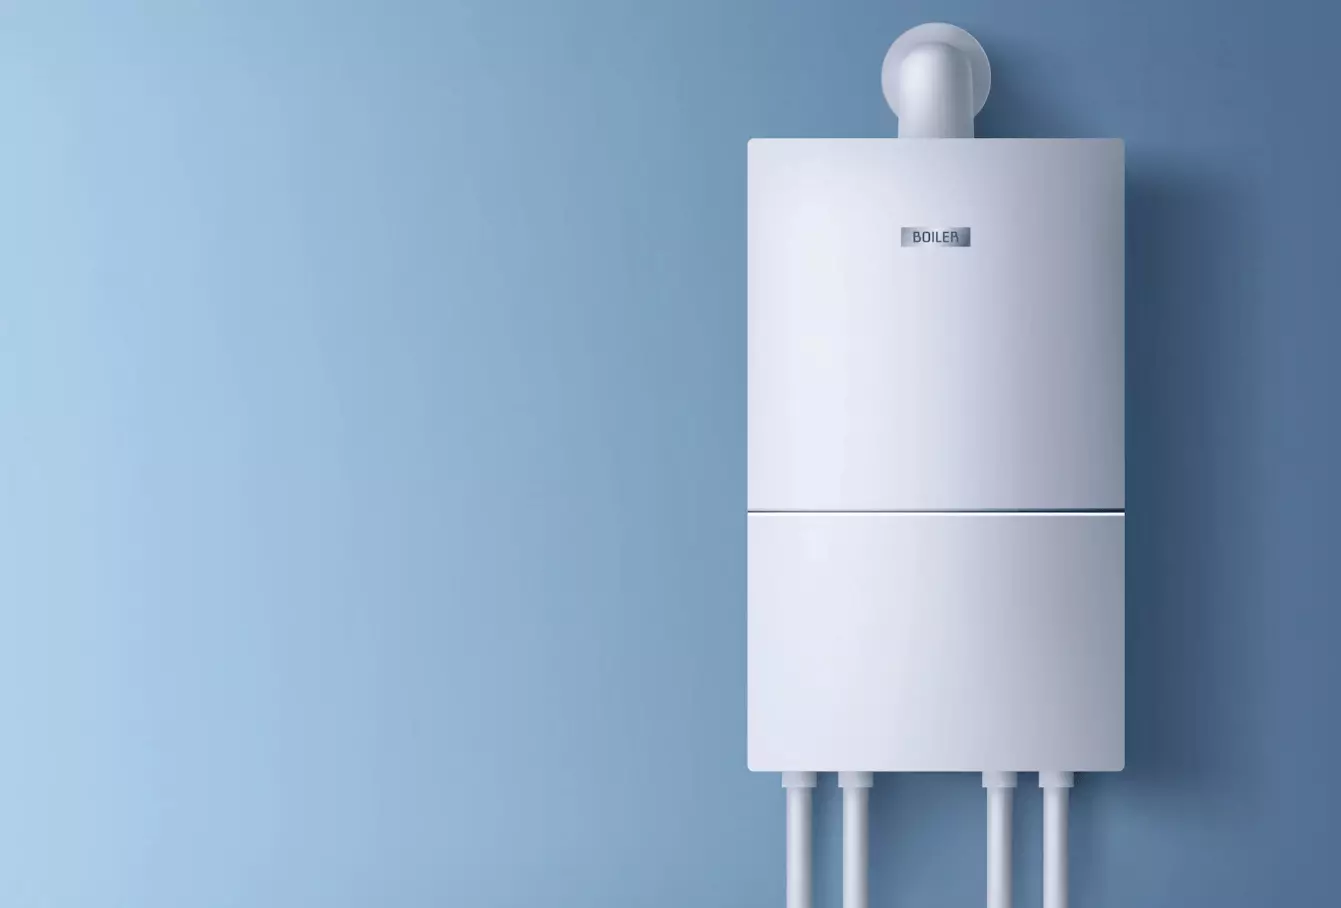 What Are The Popular Boiler Brands In The UK